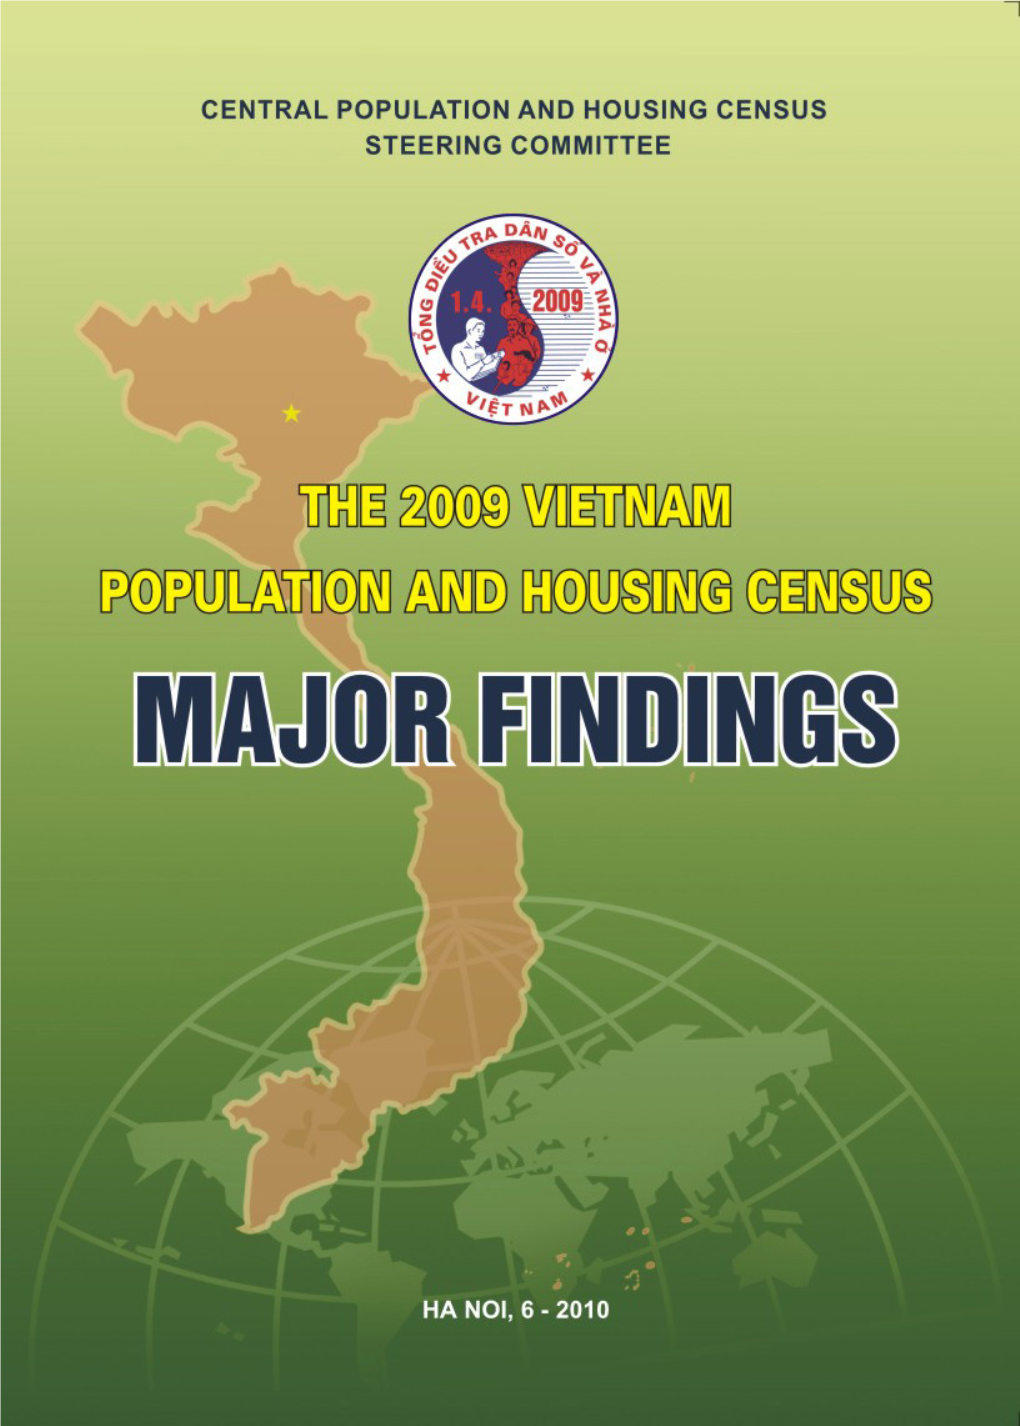 The 2009 Vietnam Population and Housing Census